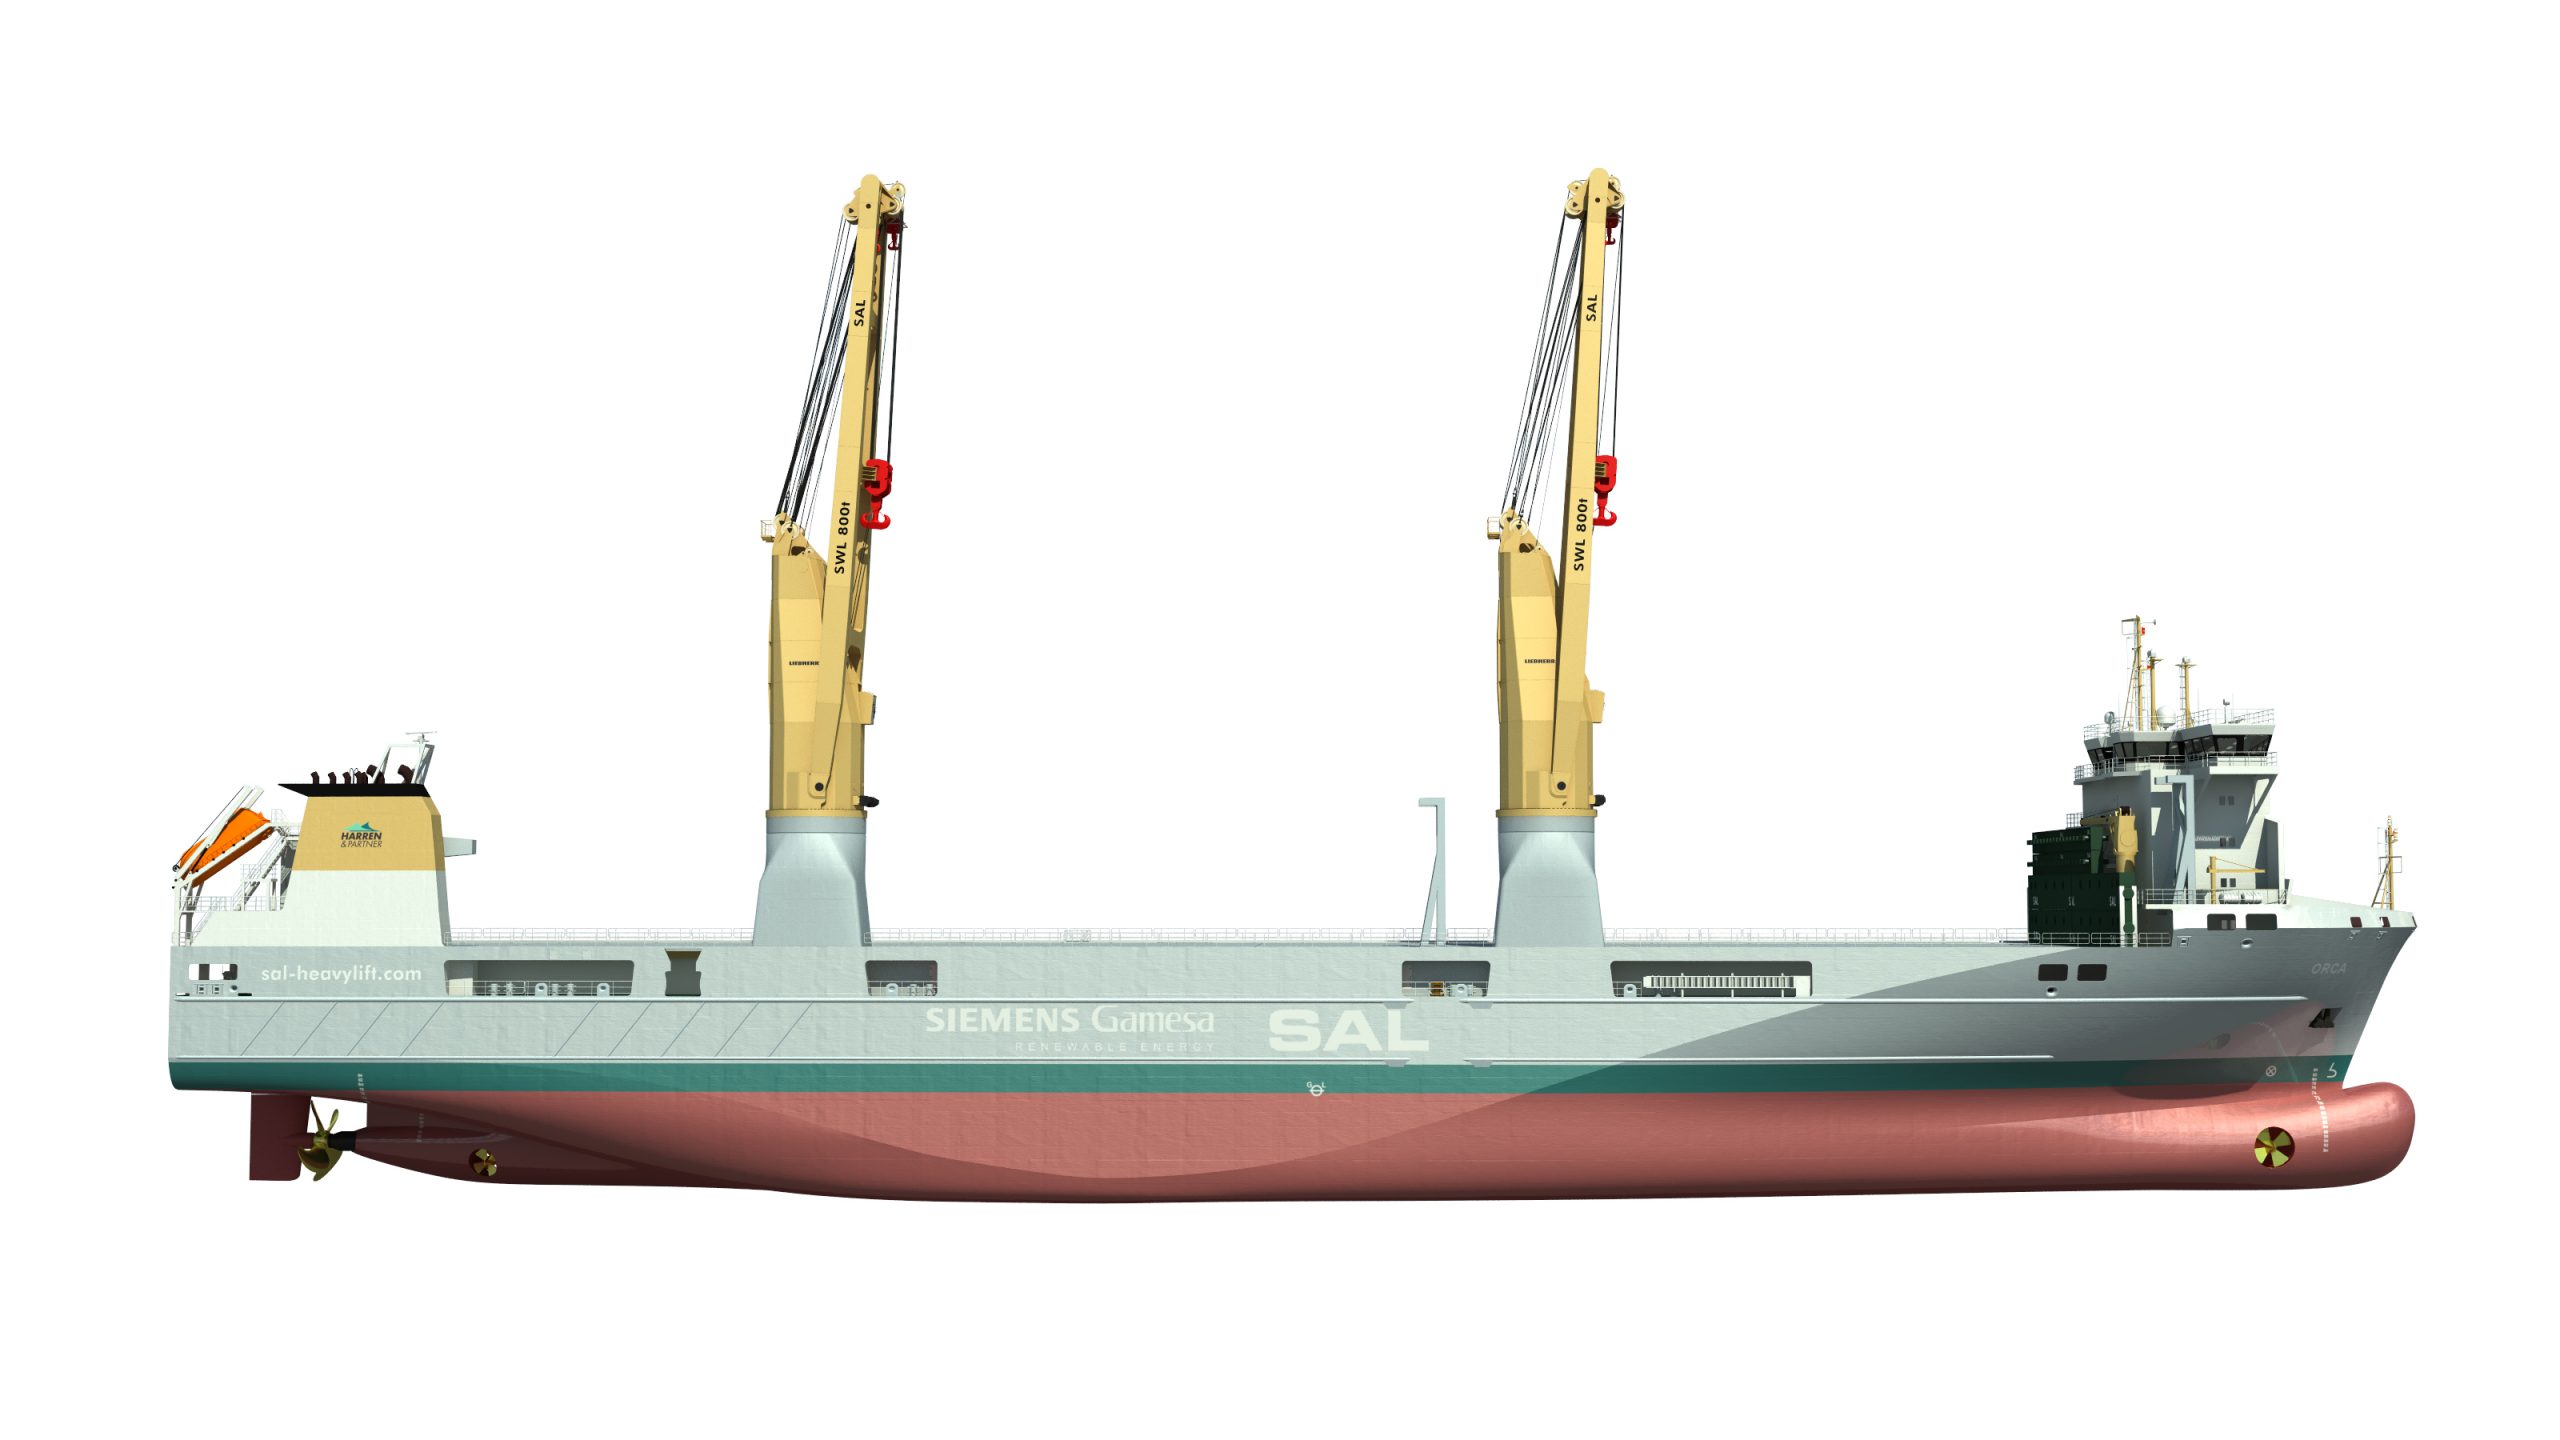 SAL Heavy Lift and Jumbo place joint order for Orca Class heavy lift vessels